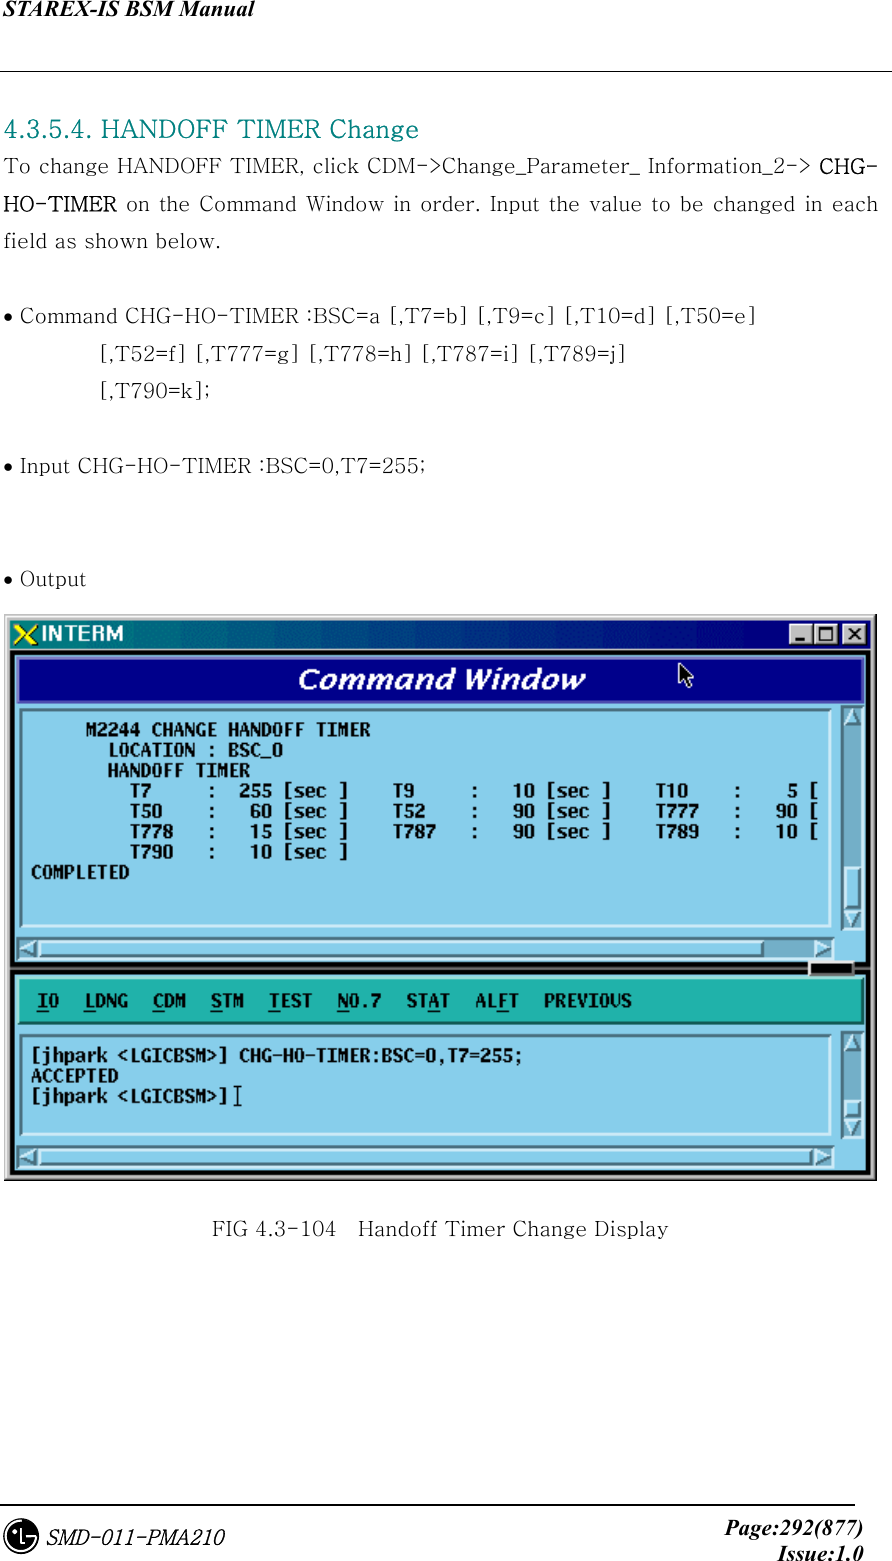 STAREX-IS BSM Manual     Page:292(877)Issue:1.0SMD-011-PMA210  4.3.5.4. HANDOFF TIMER Change To change HANDOFF TIMER, click CDM-&gt;Change_Parameter_ Information_2-&gt; CHG-HO-TIMER on the Command Window in order. Input the value to be changed  in each field as shown below.  • Command CHG-HO-TIMER :BSC=a [,T7=b] [,T9=c] [,T10=d] [,T50=e]          [,T52=f] [,T777=g] [,T778=h] [,T787=i] [,T789=j]          [,T790=k];  • Input CHG-HO-TIMER :BSC=0,T7=255;  • Output  FIG 4.3-104    Handoff Timer Change Display 